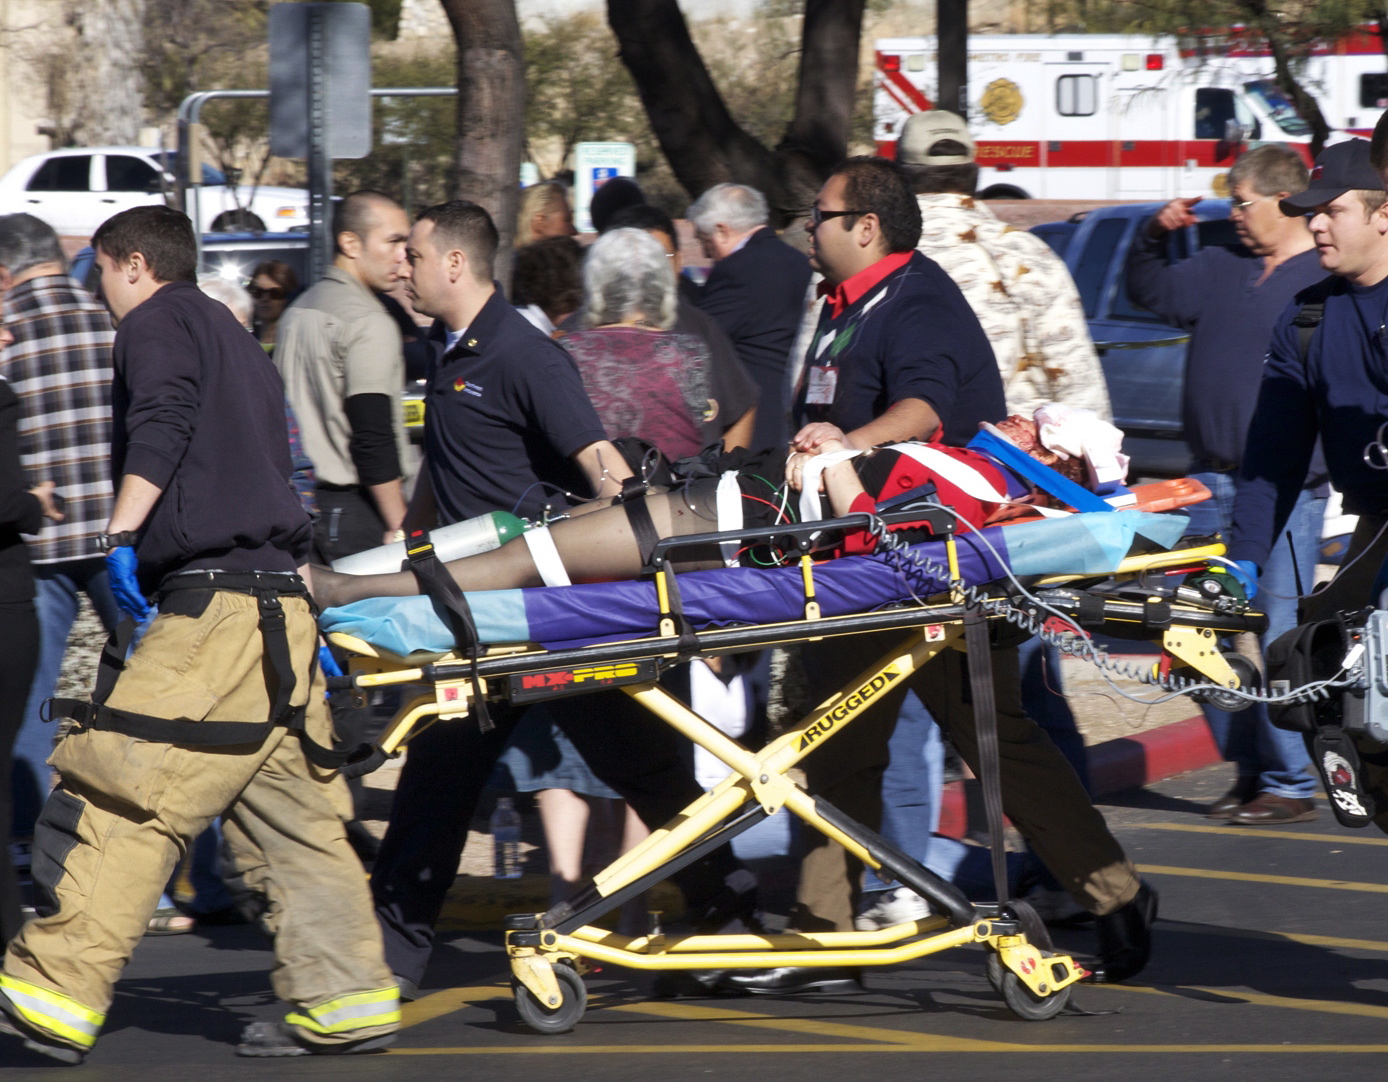 Emergency personnel and Daniel Hernandez, an intern for U.S. Rep. Gabrielle Giffords, second right, move Giffords after she was shot in the head outside a shopping center in Tucson, Ariz.